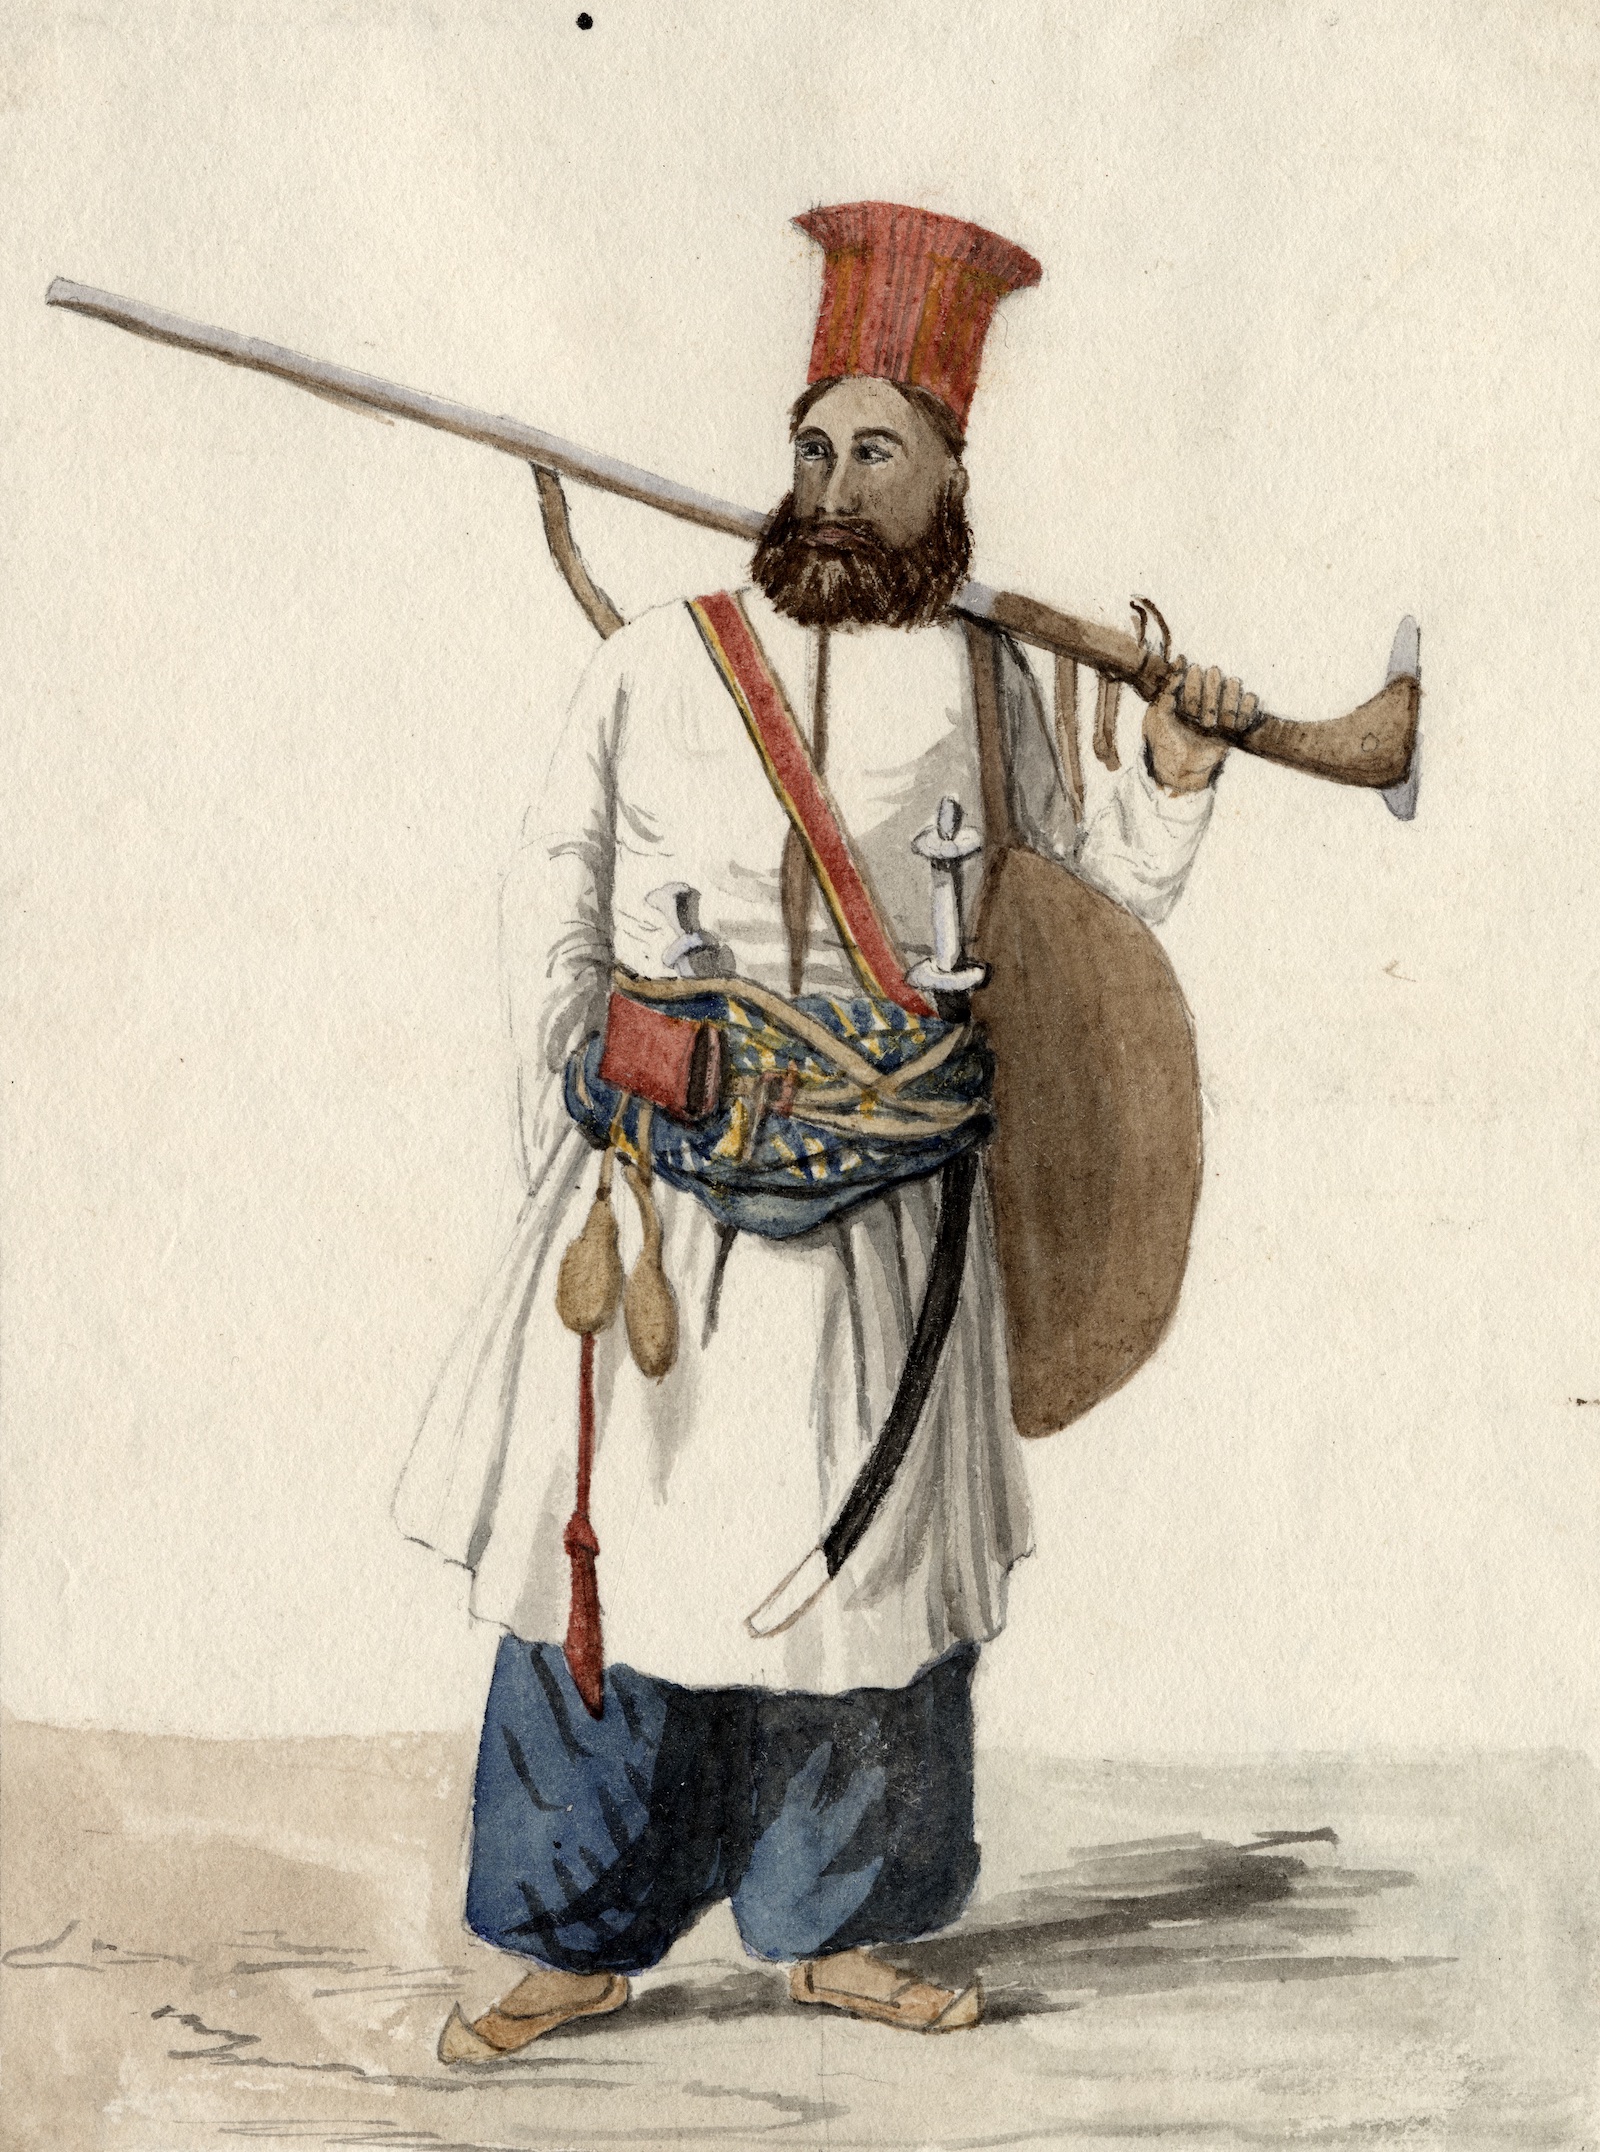 A Baluchi soldier of Sindh, watercolour by unknown artist, c. 1838.